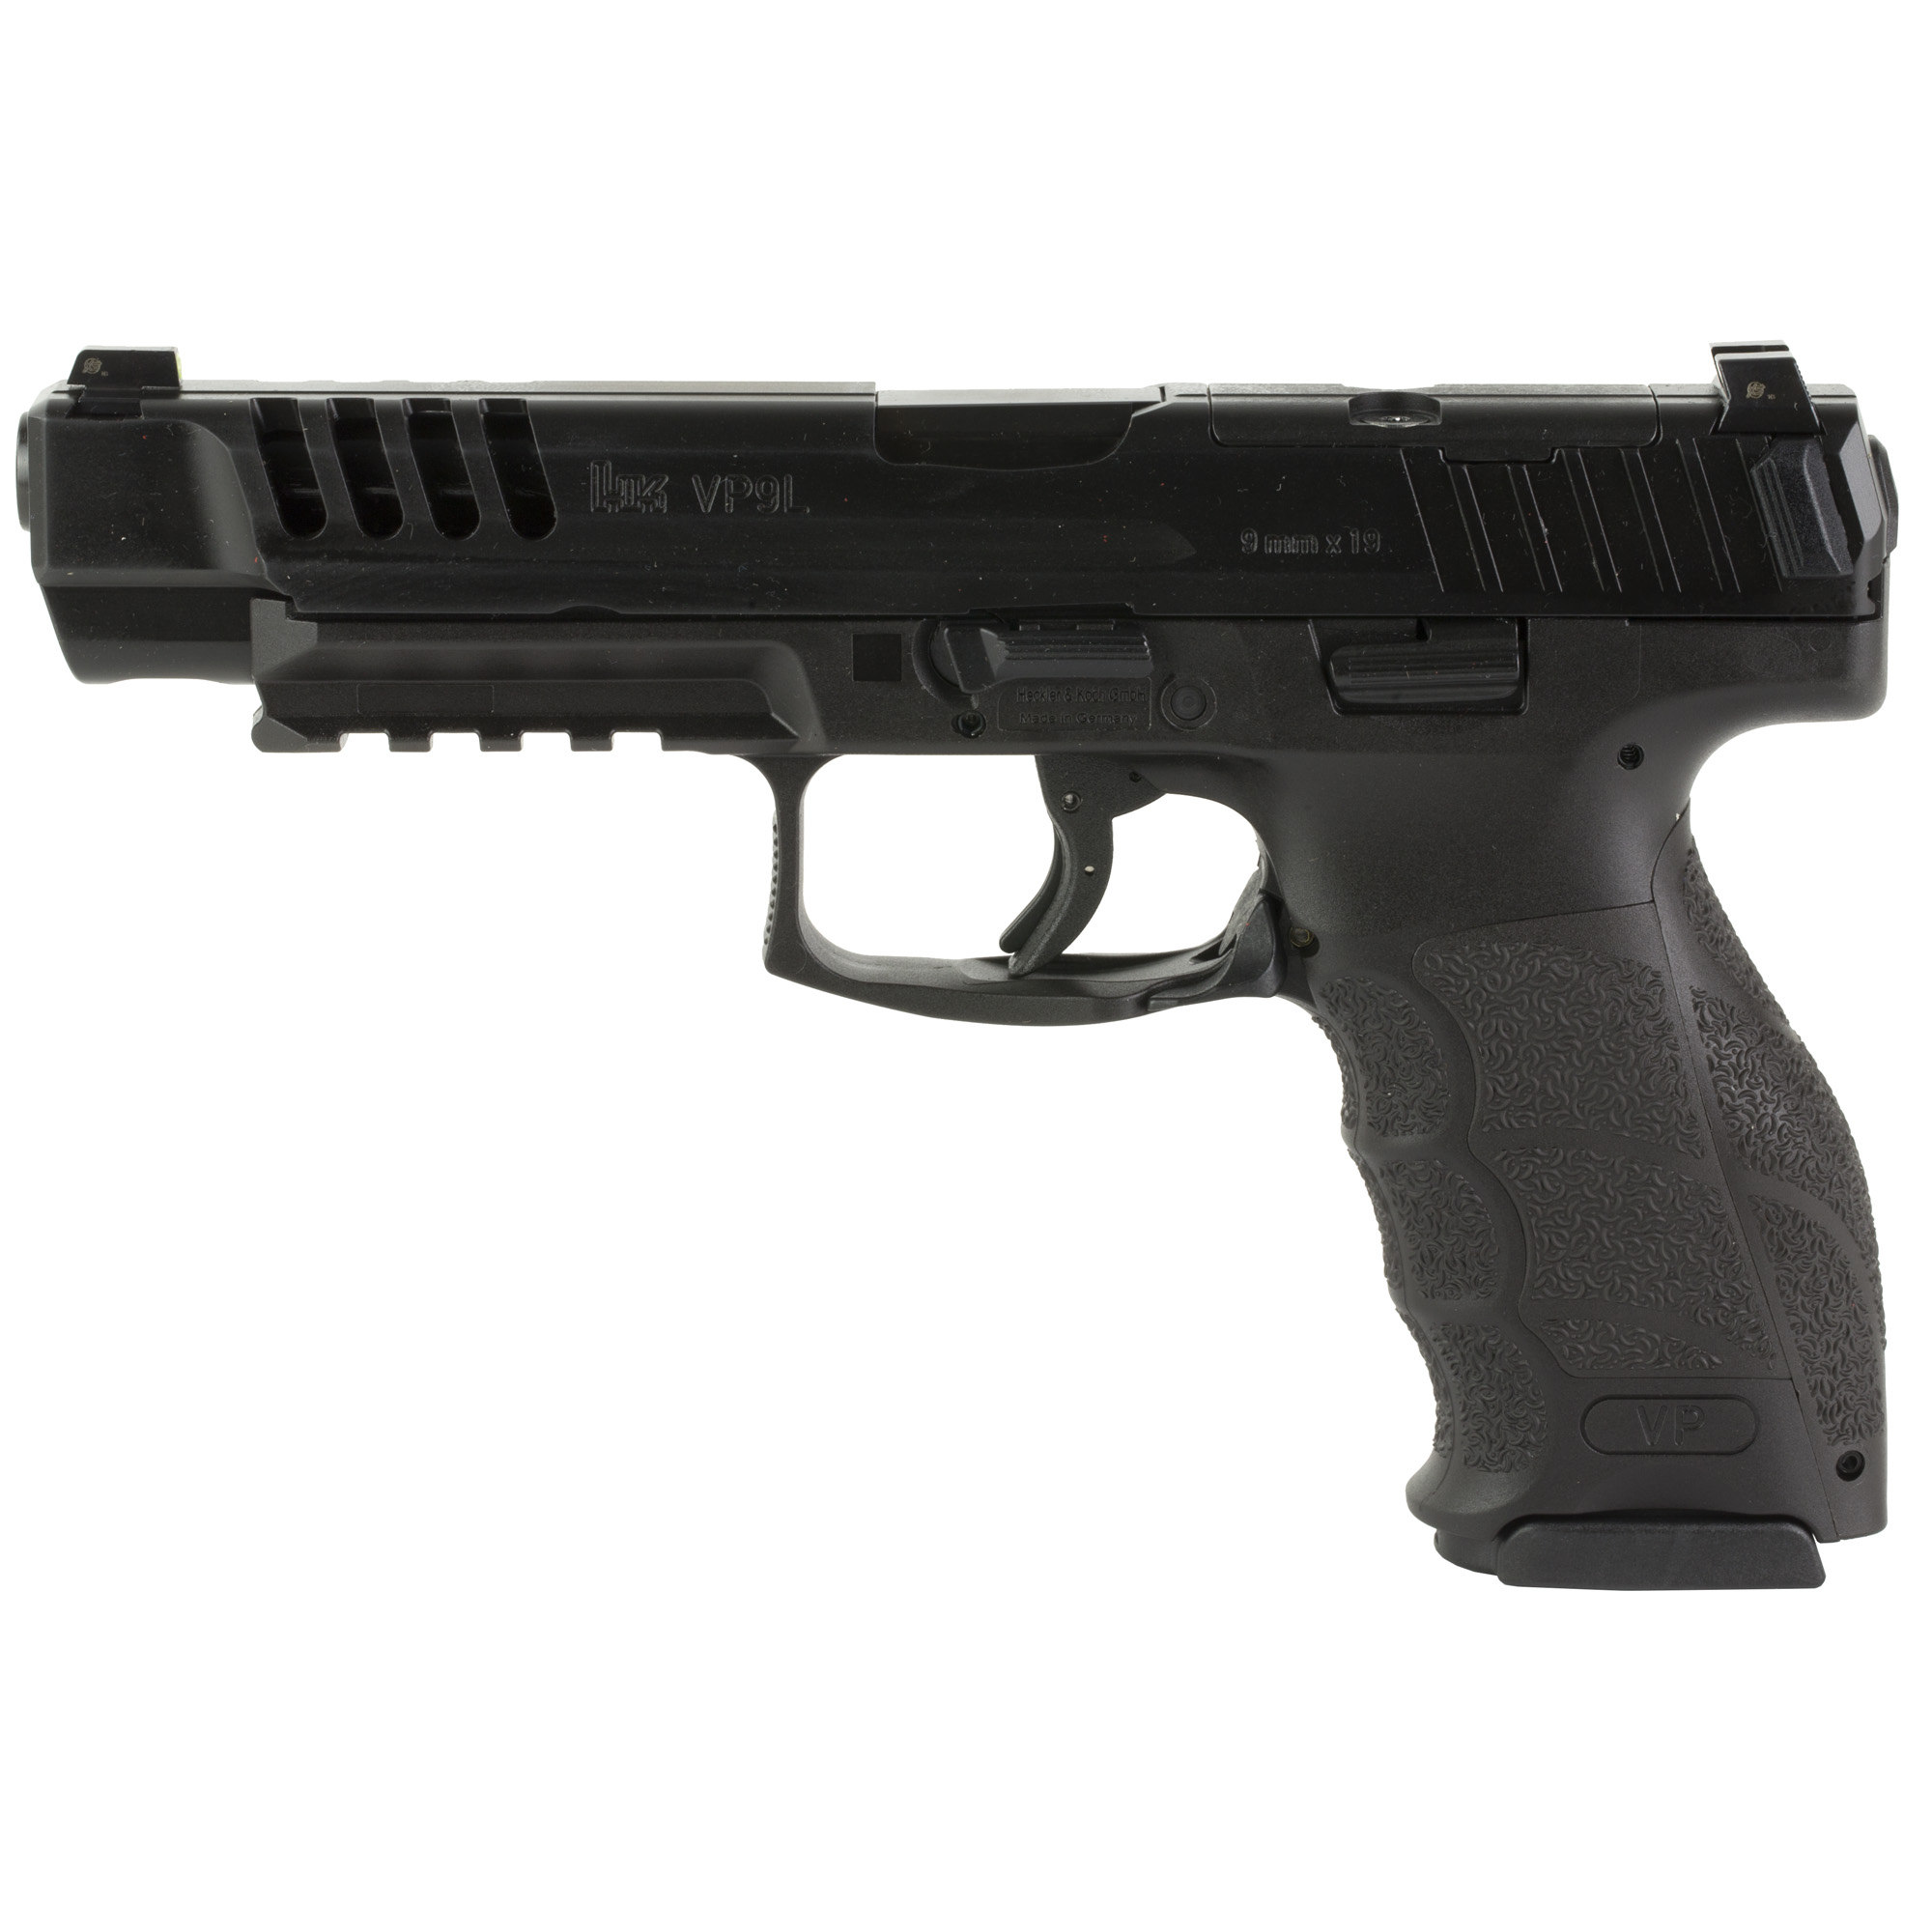 HK VP9L OR 9MM 5 3-10RD BLK NS